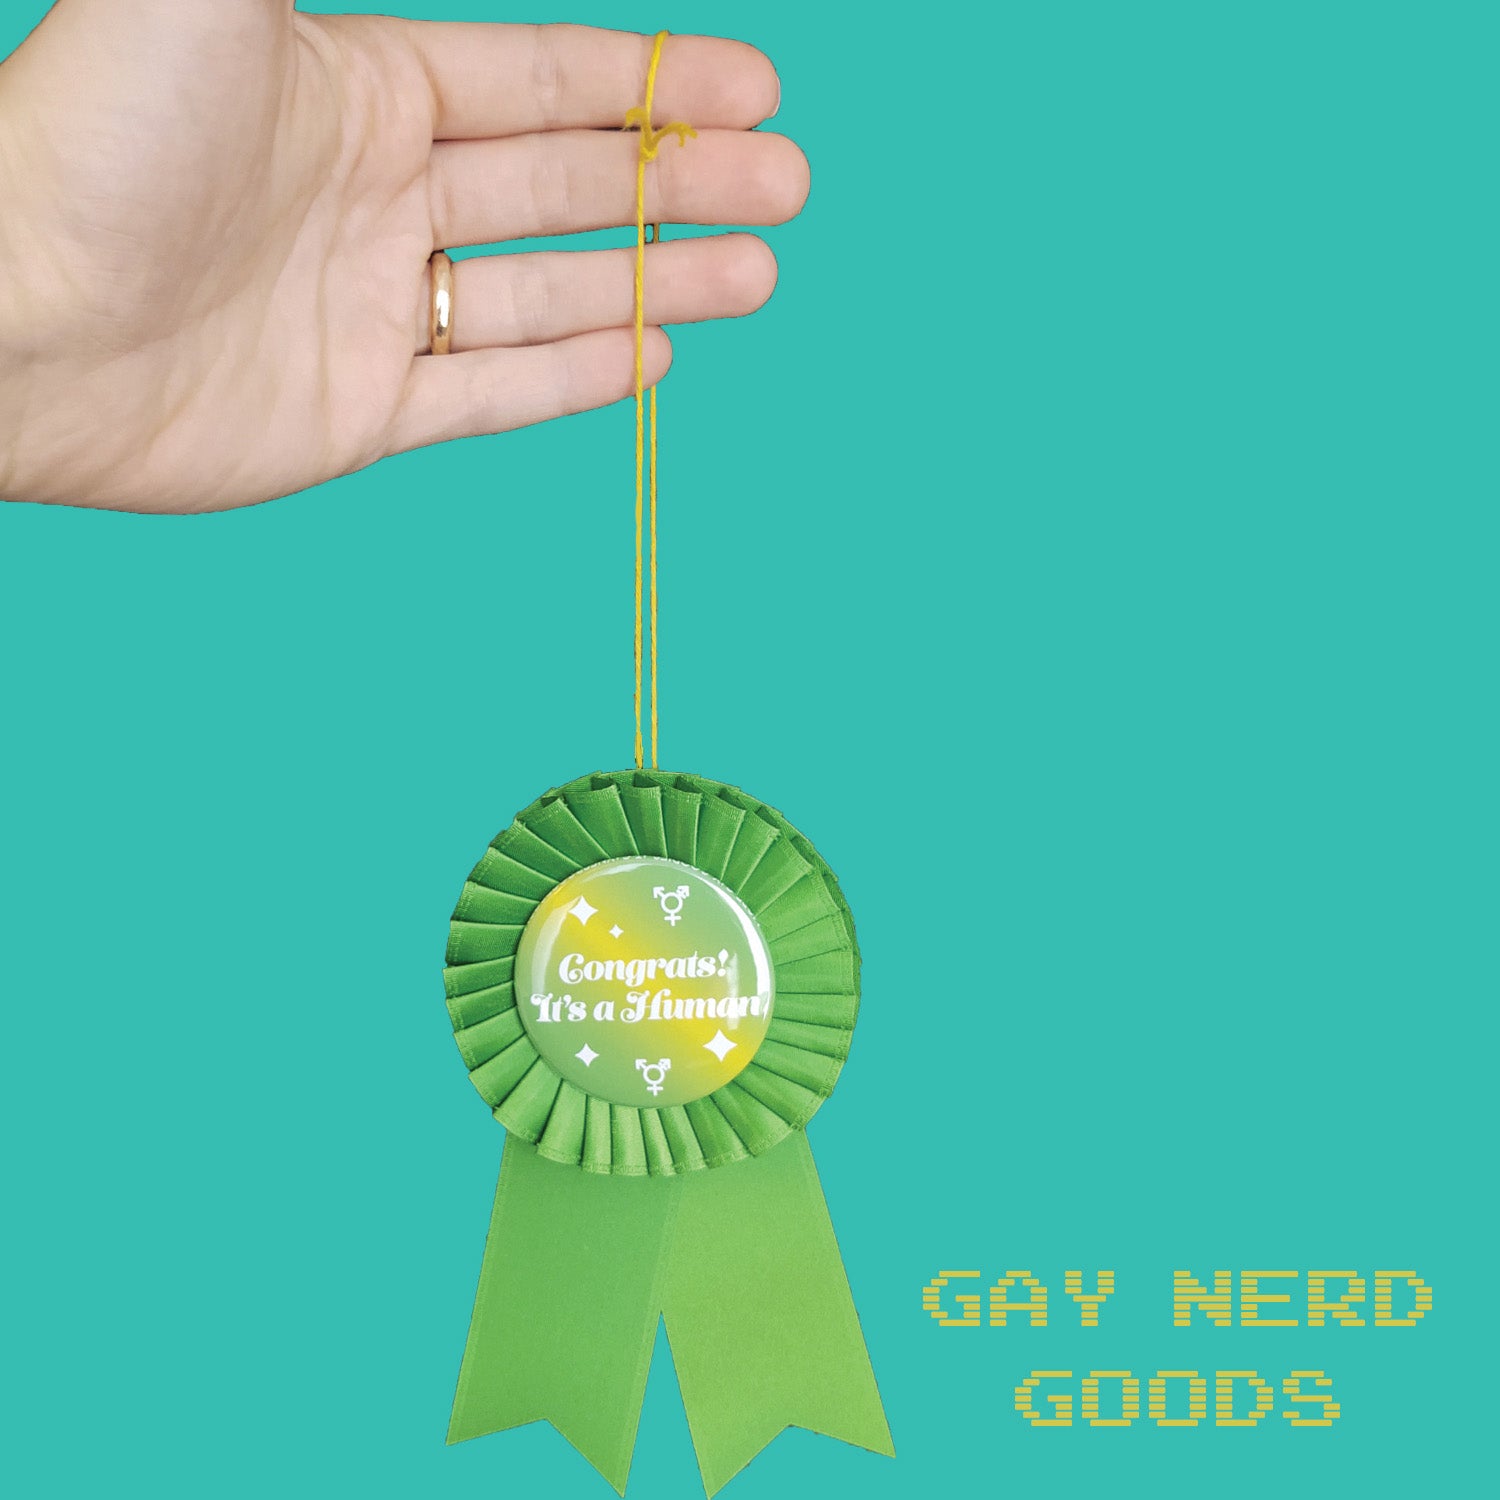 hand holding up the thread of the "congrats it's a human" award ribbon on a mint green background